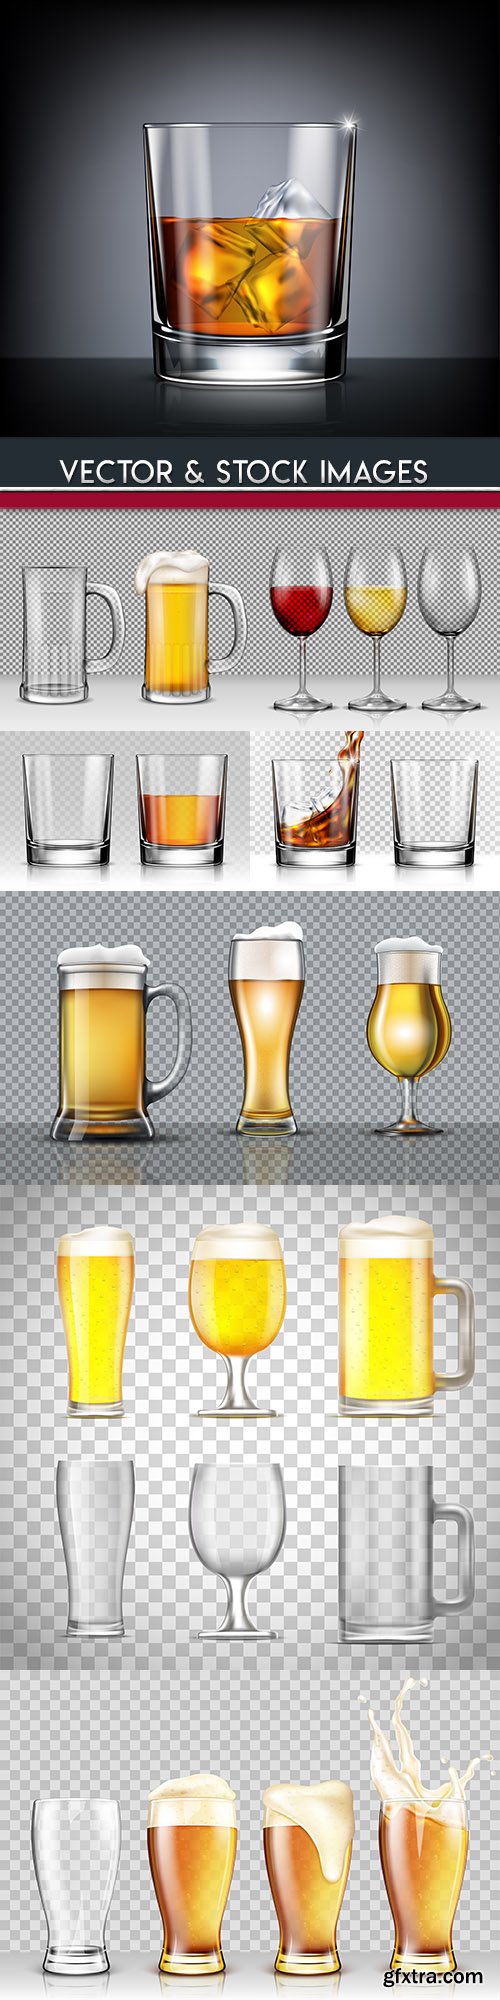 Glass glass for whisky beer and alcoholic beverages